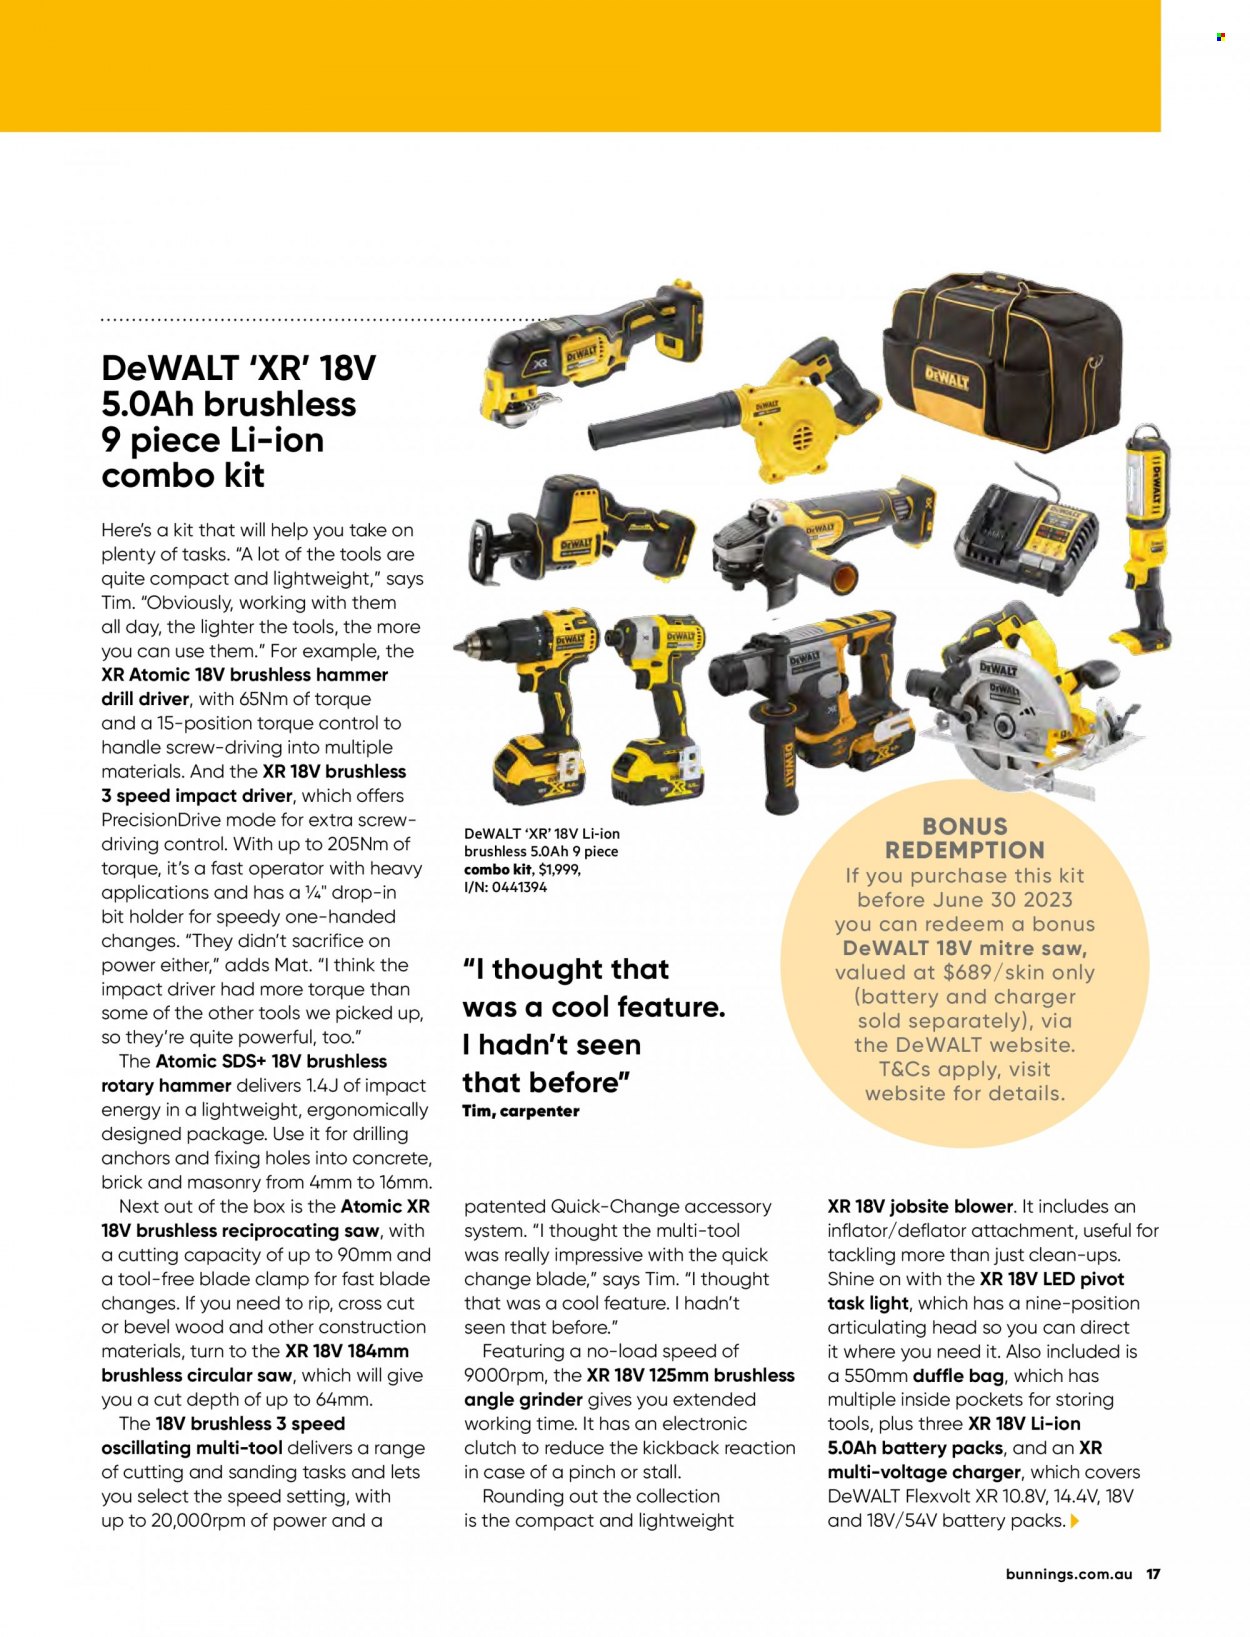 thumbnail - Bunnings Warehouse mailer - 01.05.2023 - 30.06.2023 - Sales products - DeWALT, drill, impact driver, hammer drill, grinder, circular saw, saw, angle grinder, reciprocating saw, combo kit, blower. Page 109.